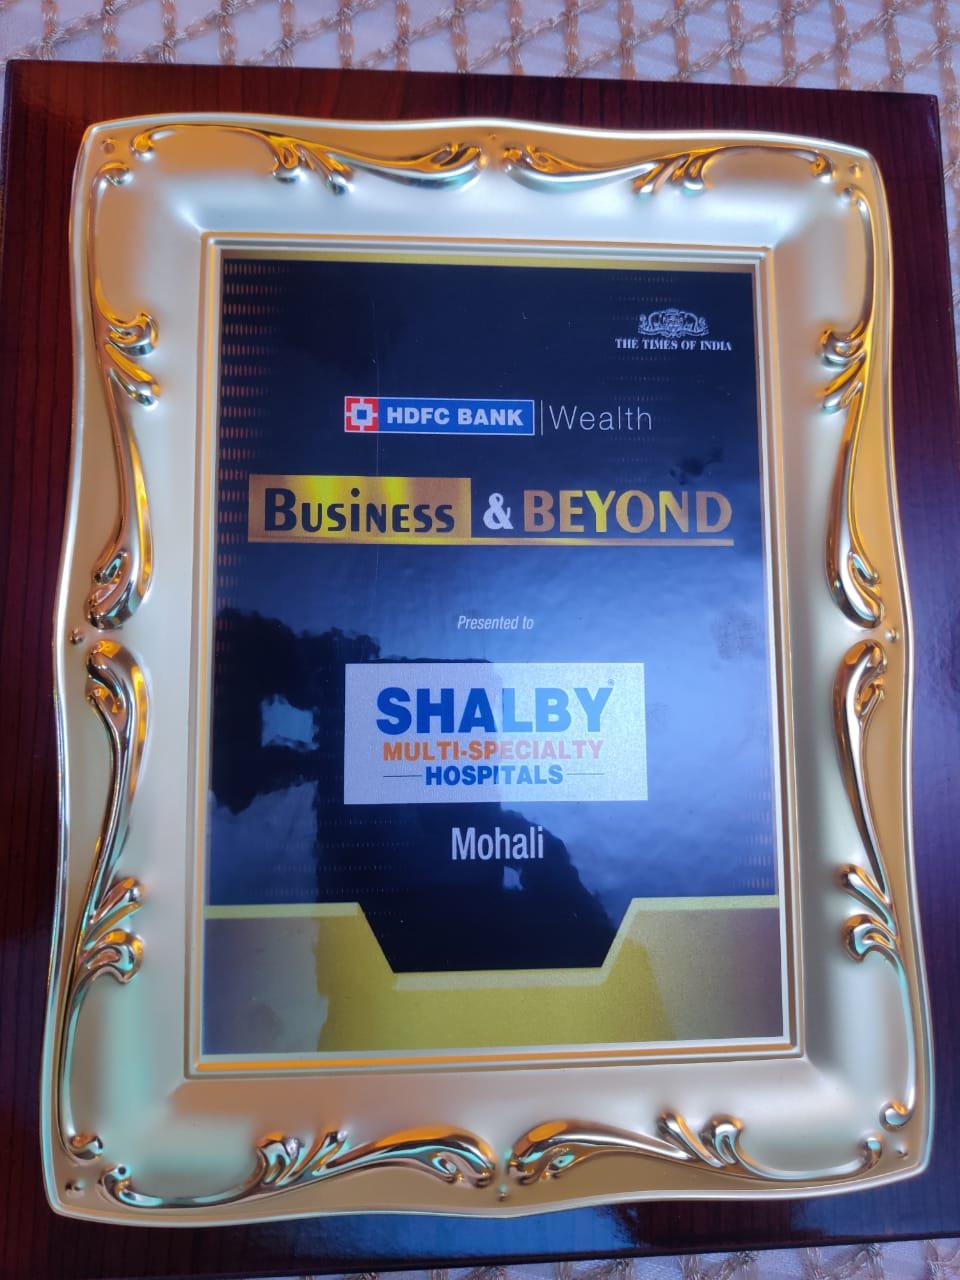 Business & Beyond Award by The Times of India